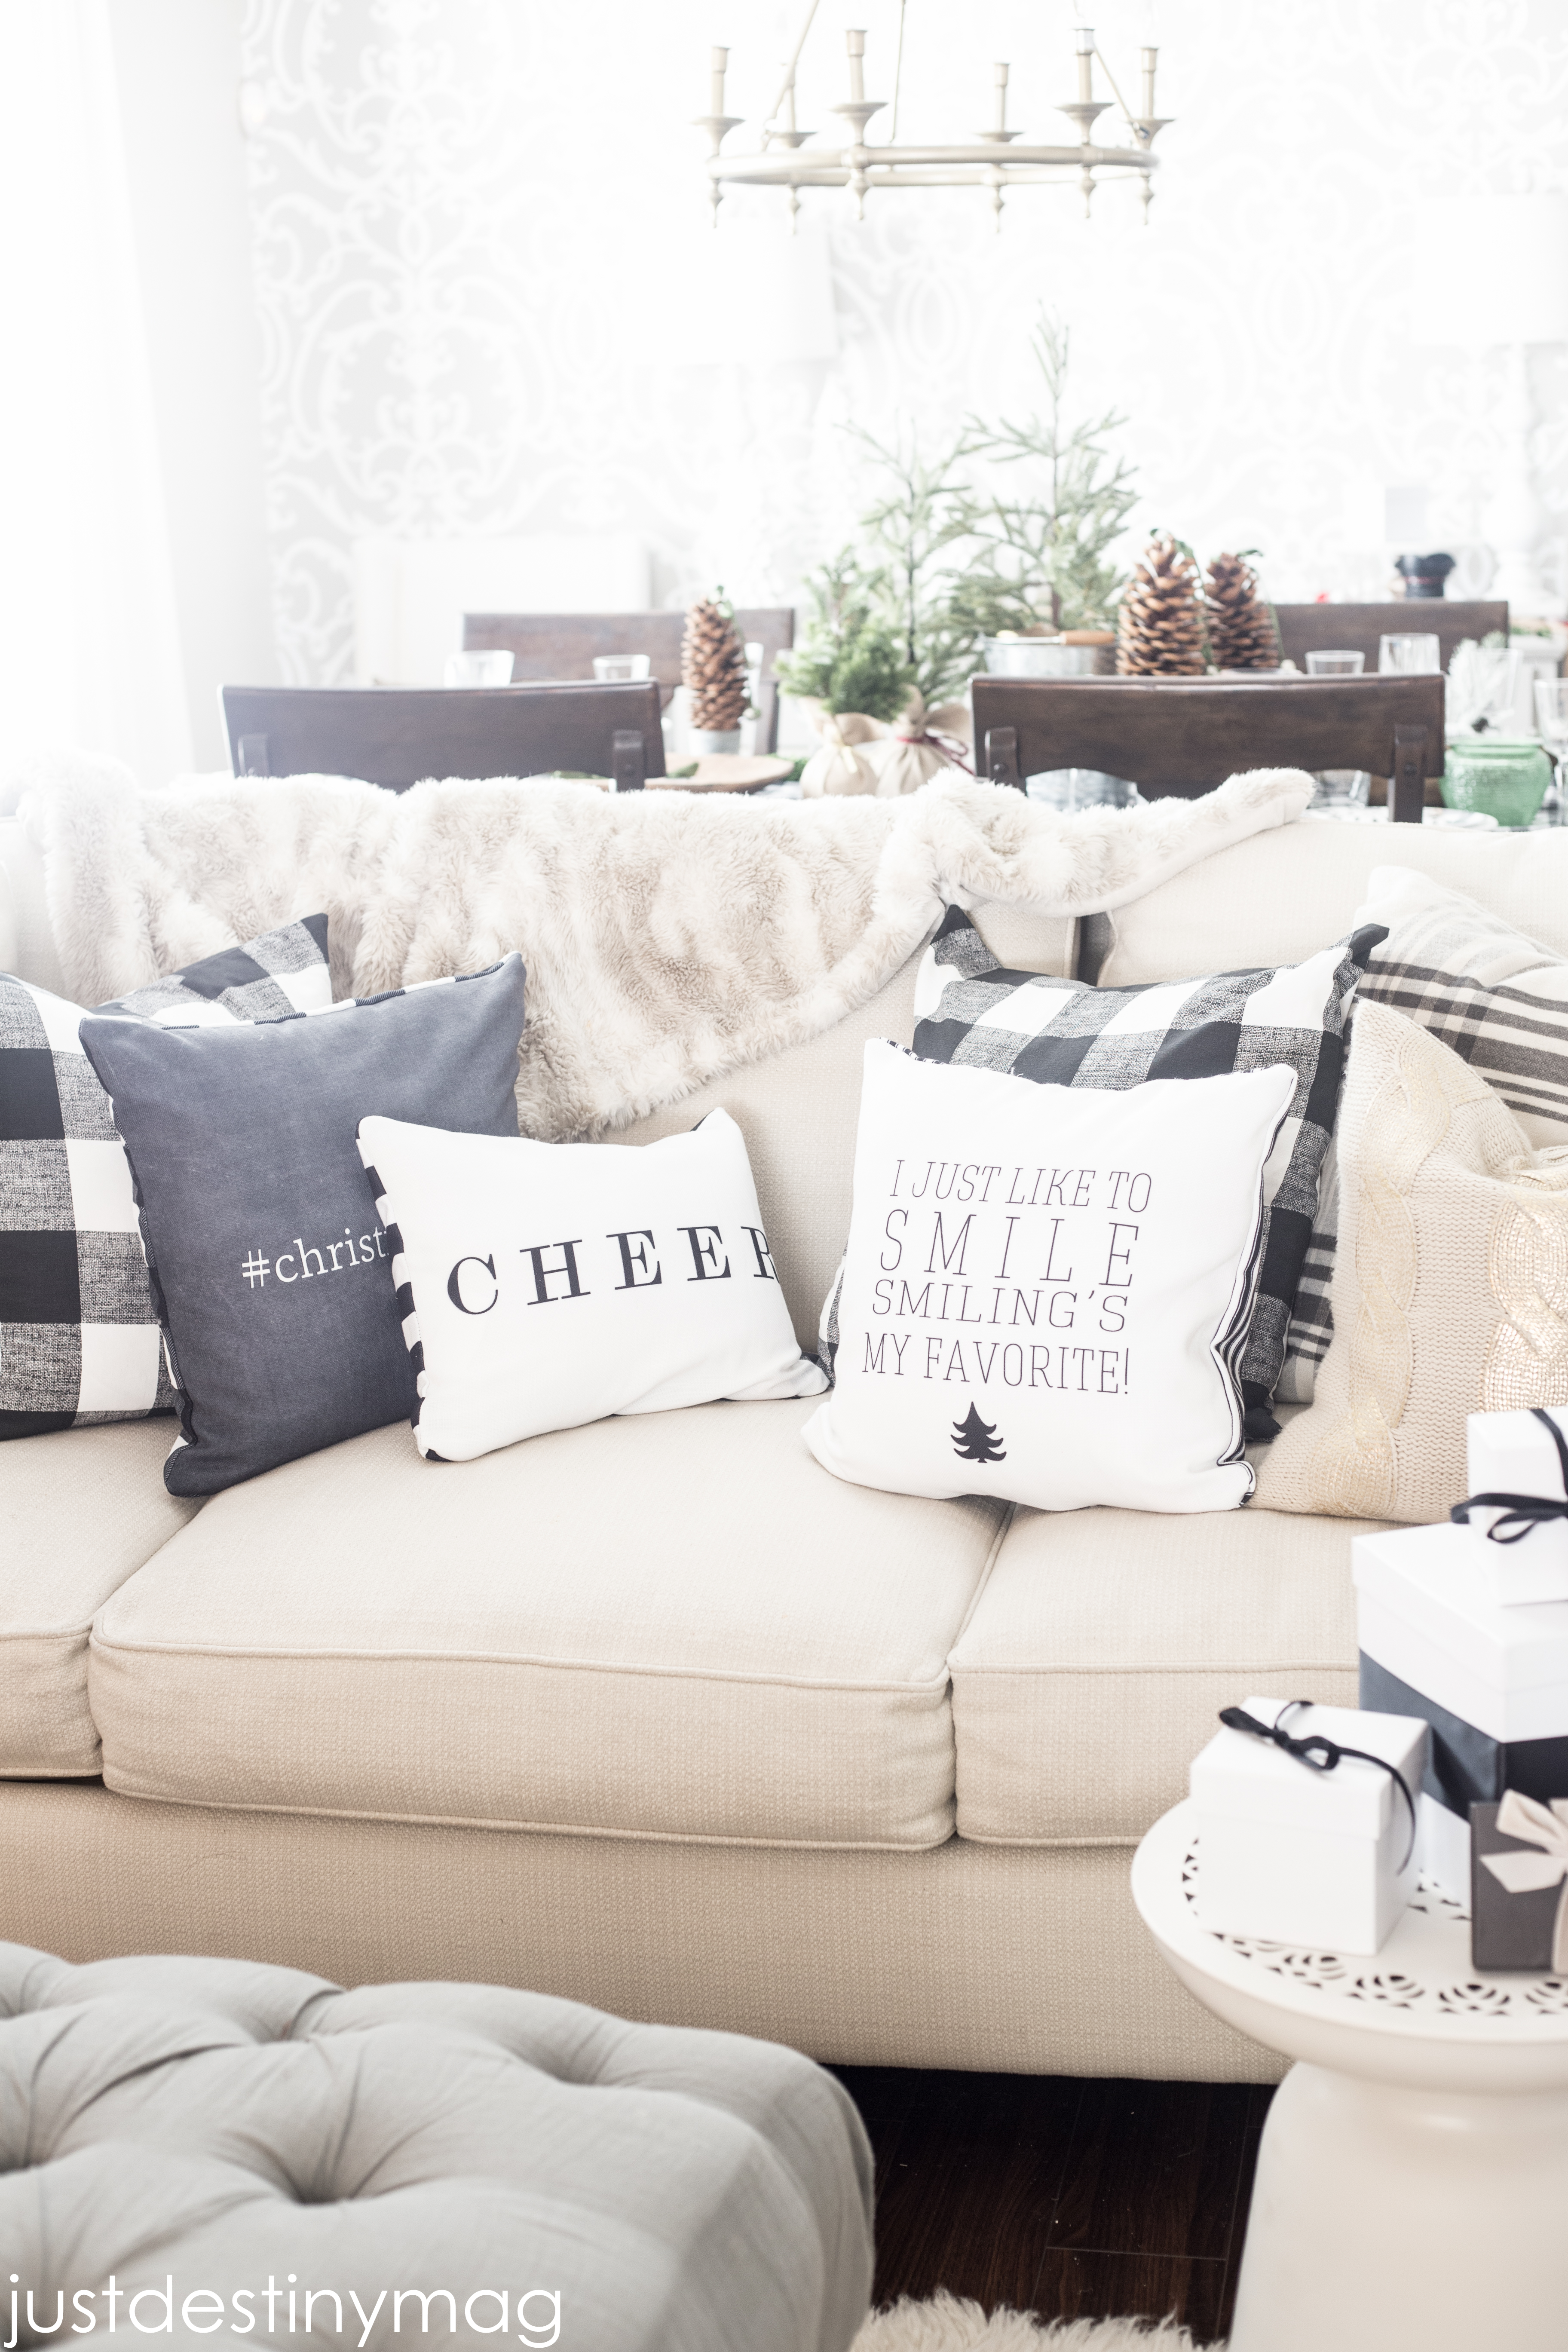 Shutterfly Pillows and Home Decor-3